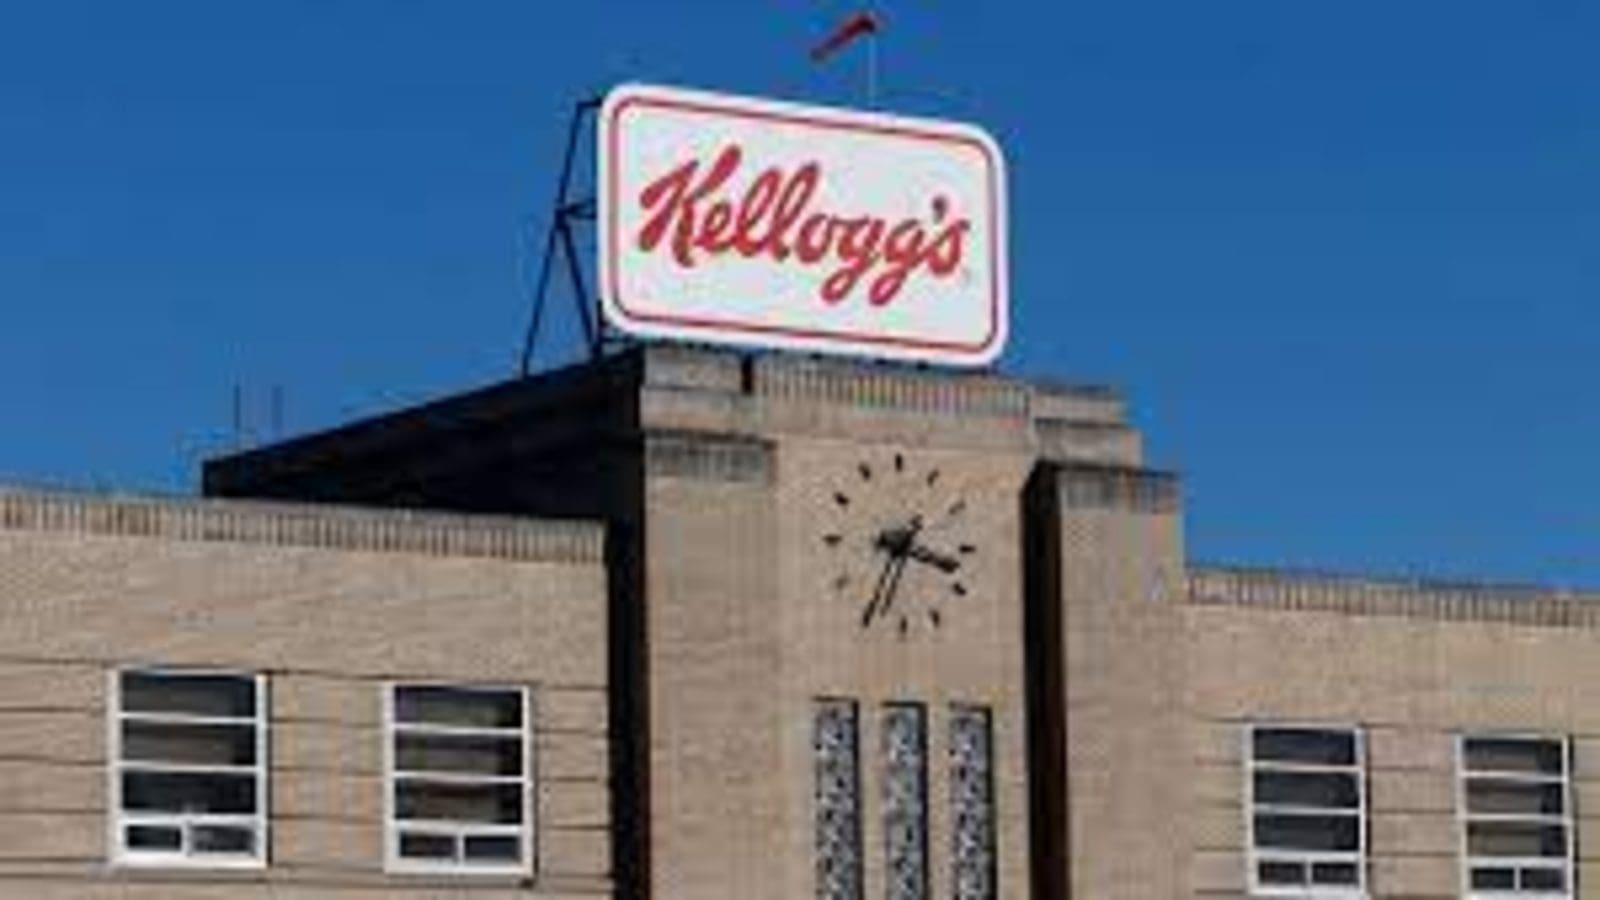 Kellog reports better-than-expected Q3 financial performance of 9% revenue growth